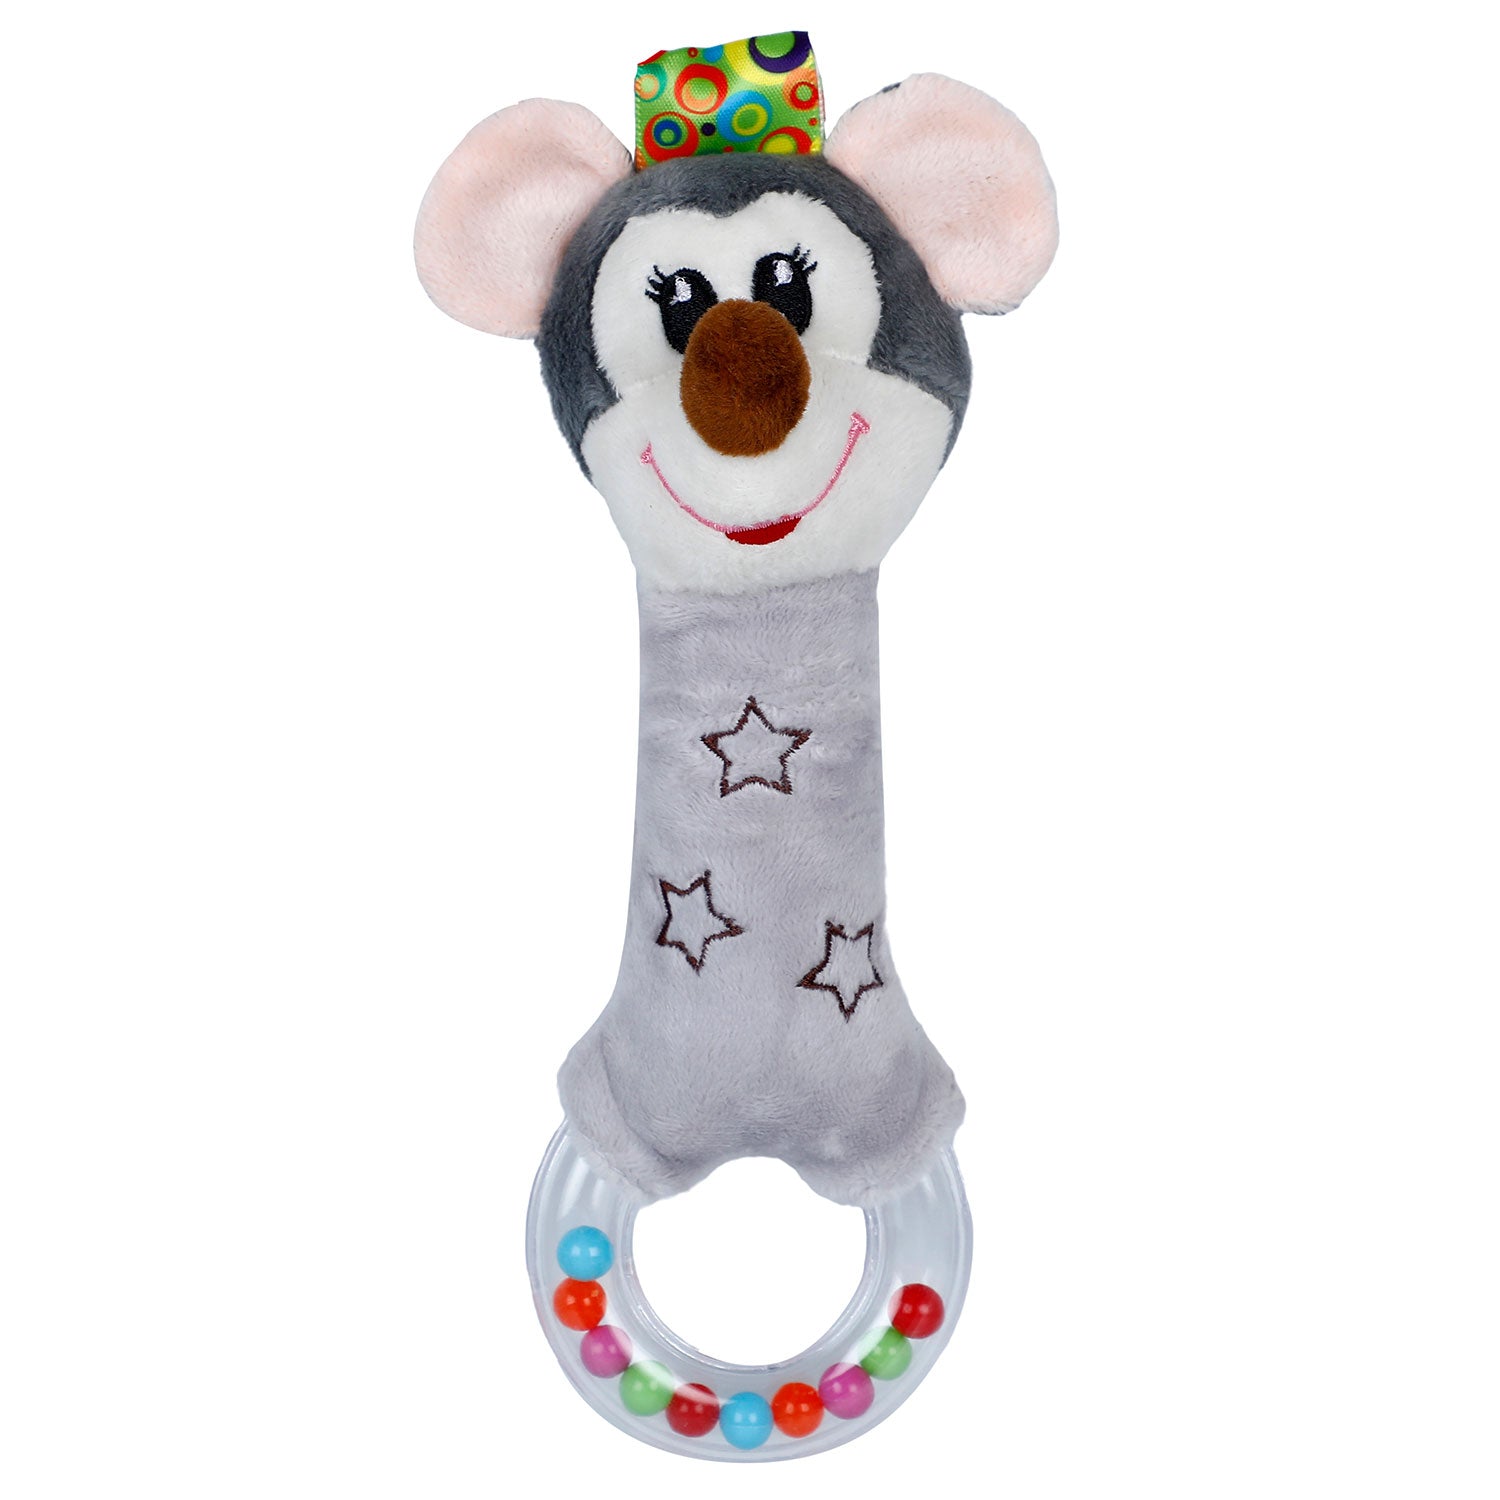 Baby Moo Mischievous Mouse Squeaker Sound Handheld Rattle Toy - Brown